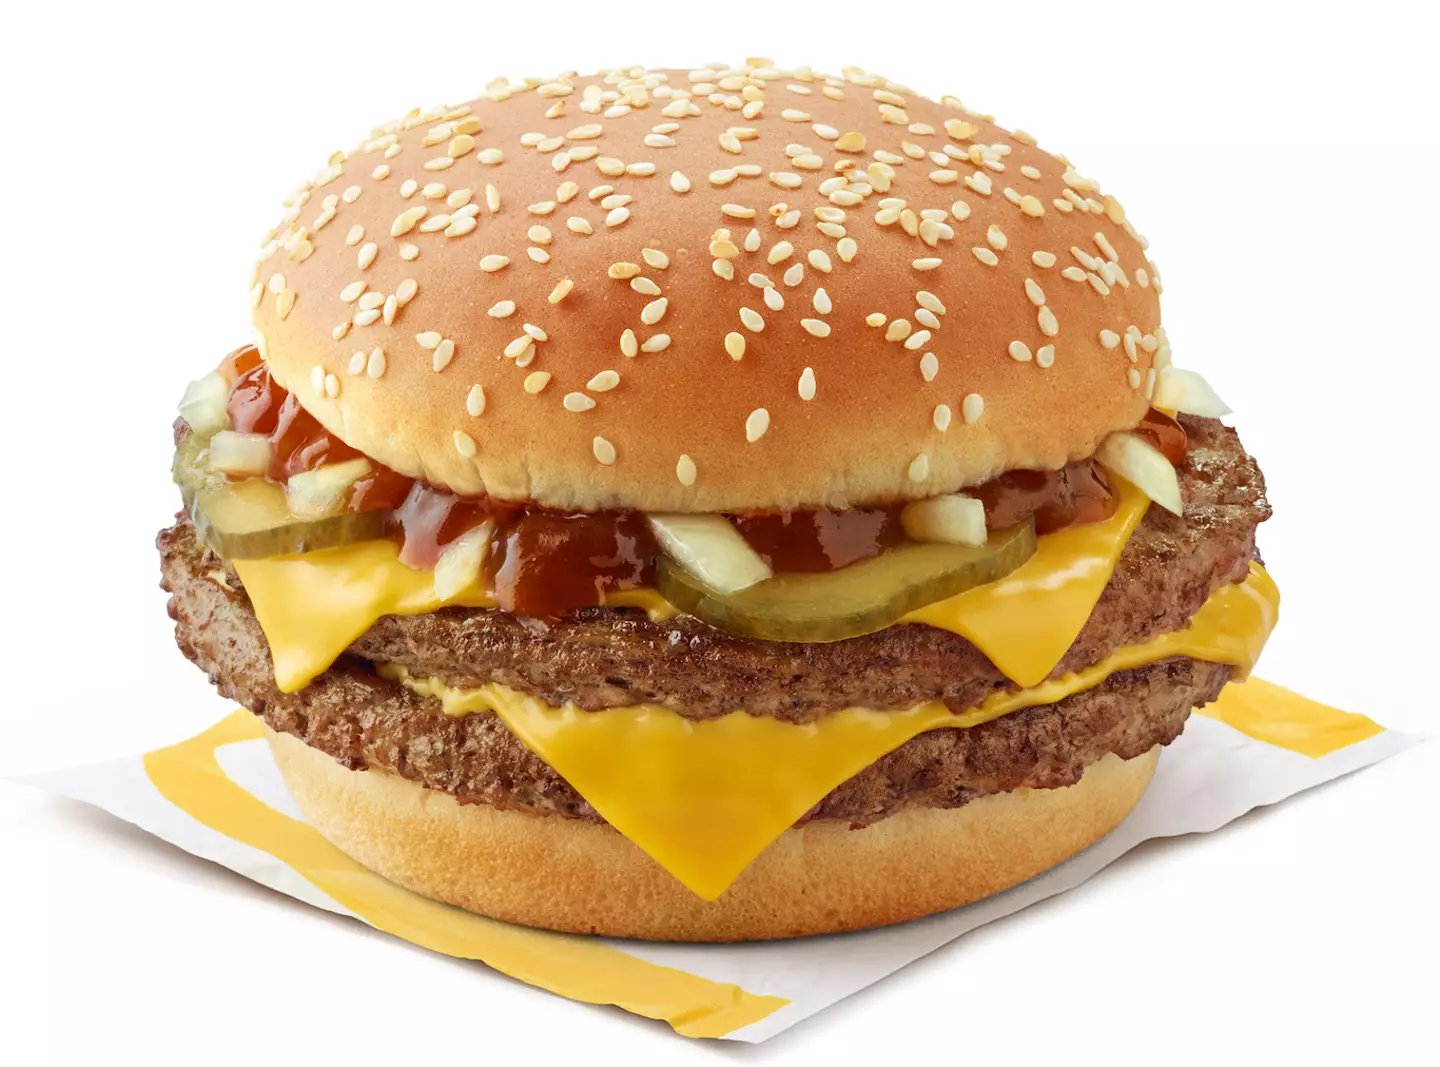 The BBQ quarter pounder is new (